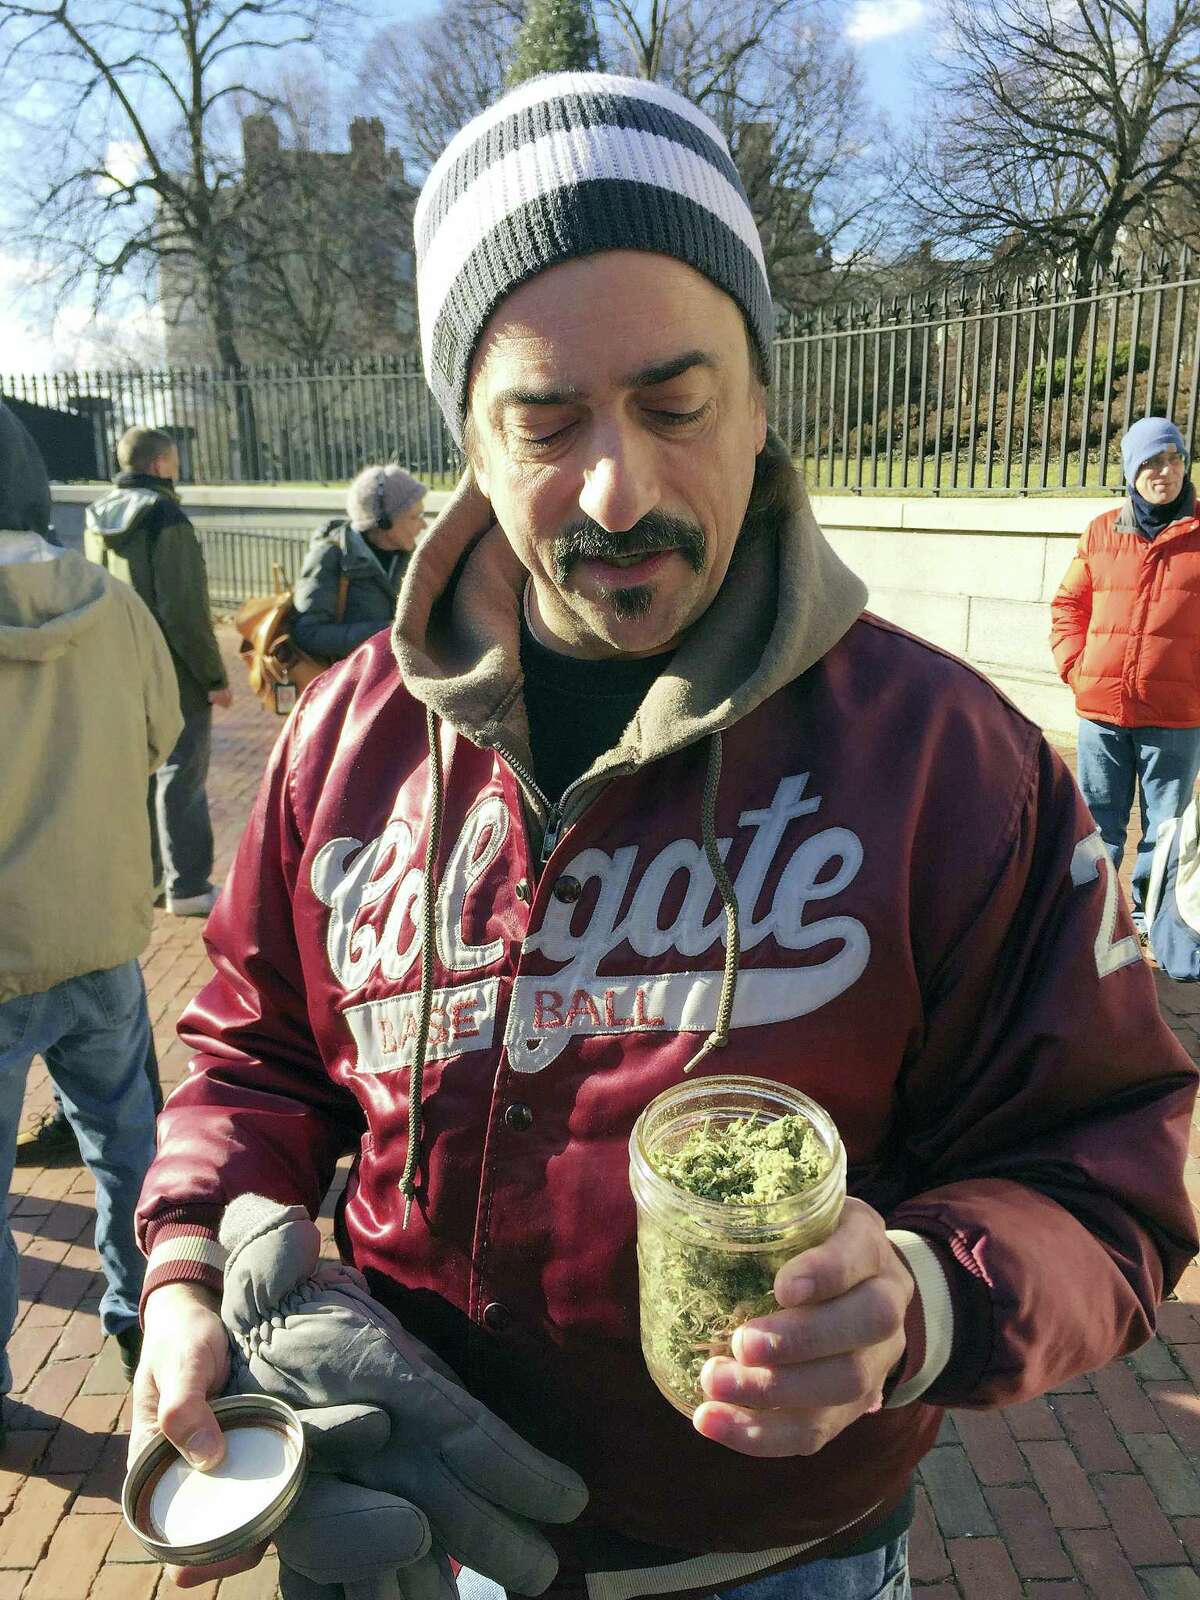 Keith Saunders, a marijuana activist from Scituate, Mass., holds a jar that he says contains just under an ounce of pot, now legal in Massachusetts. Advocates gathered in front of the Massachusetts Statehouse Thursday to celebrate the voter-approved law legalizing the recreational use of marijuana that took effect at midnight Thursday.